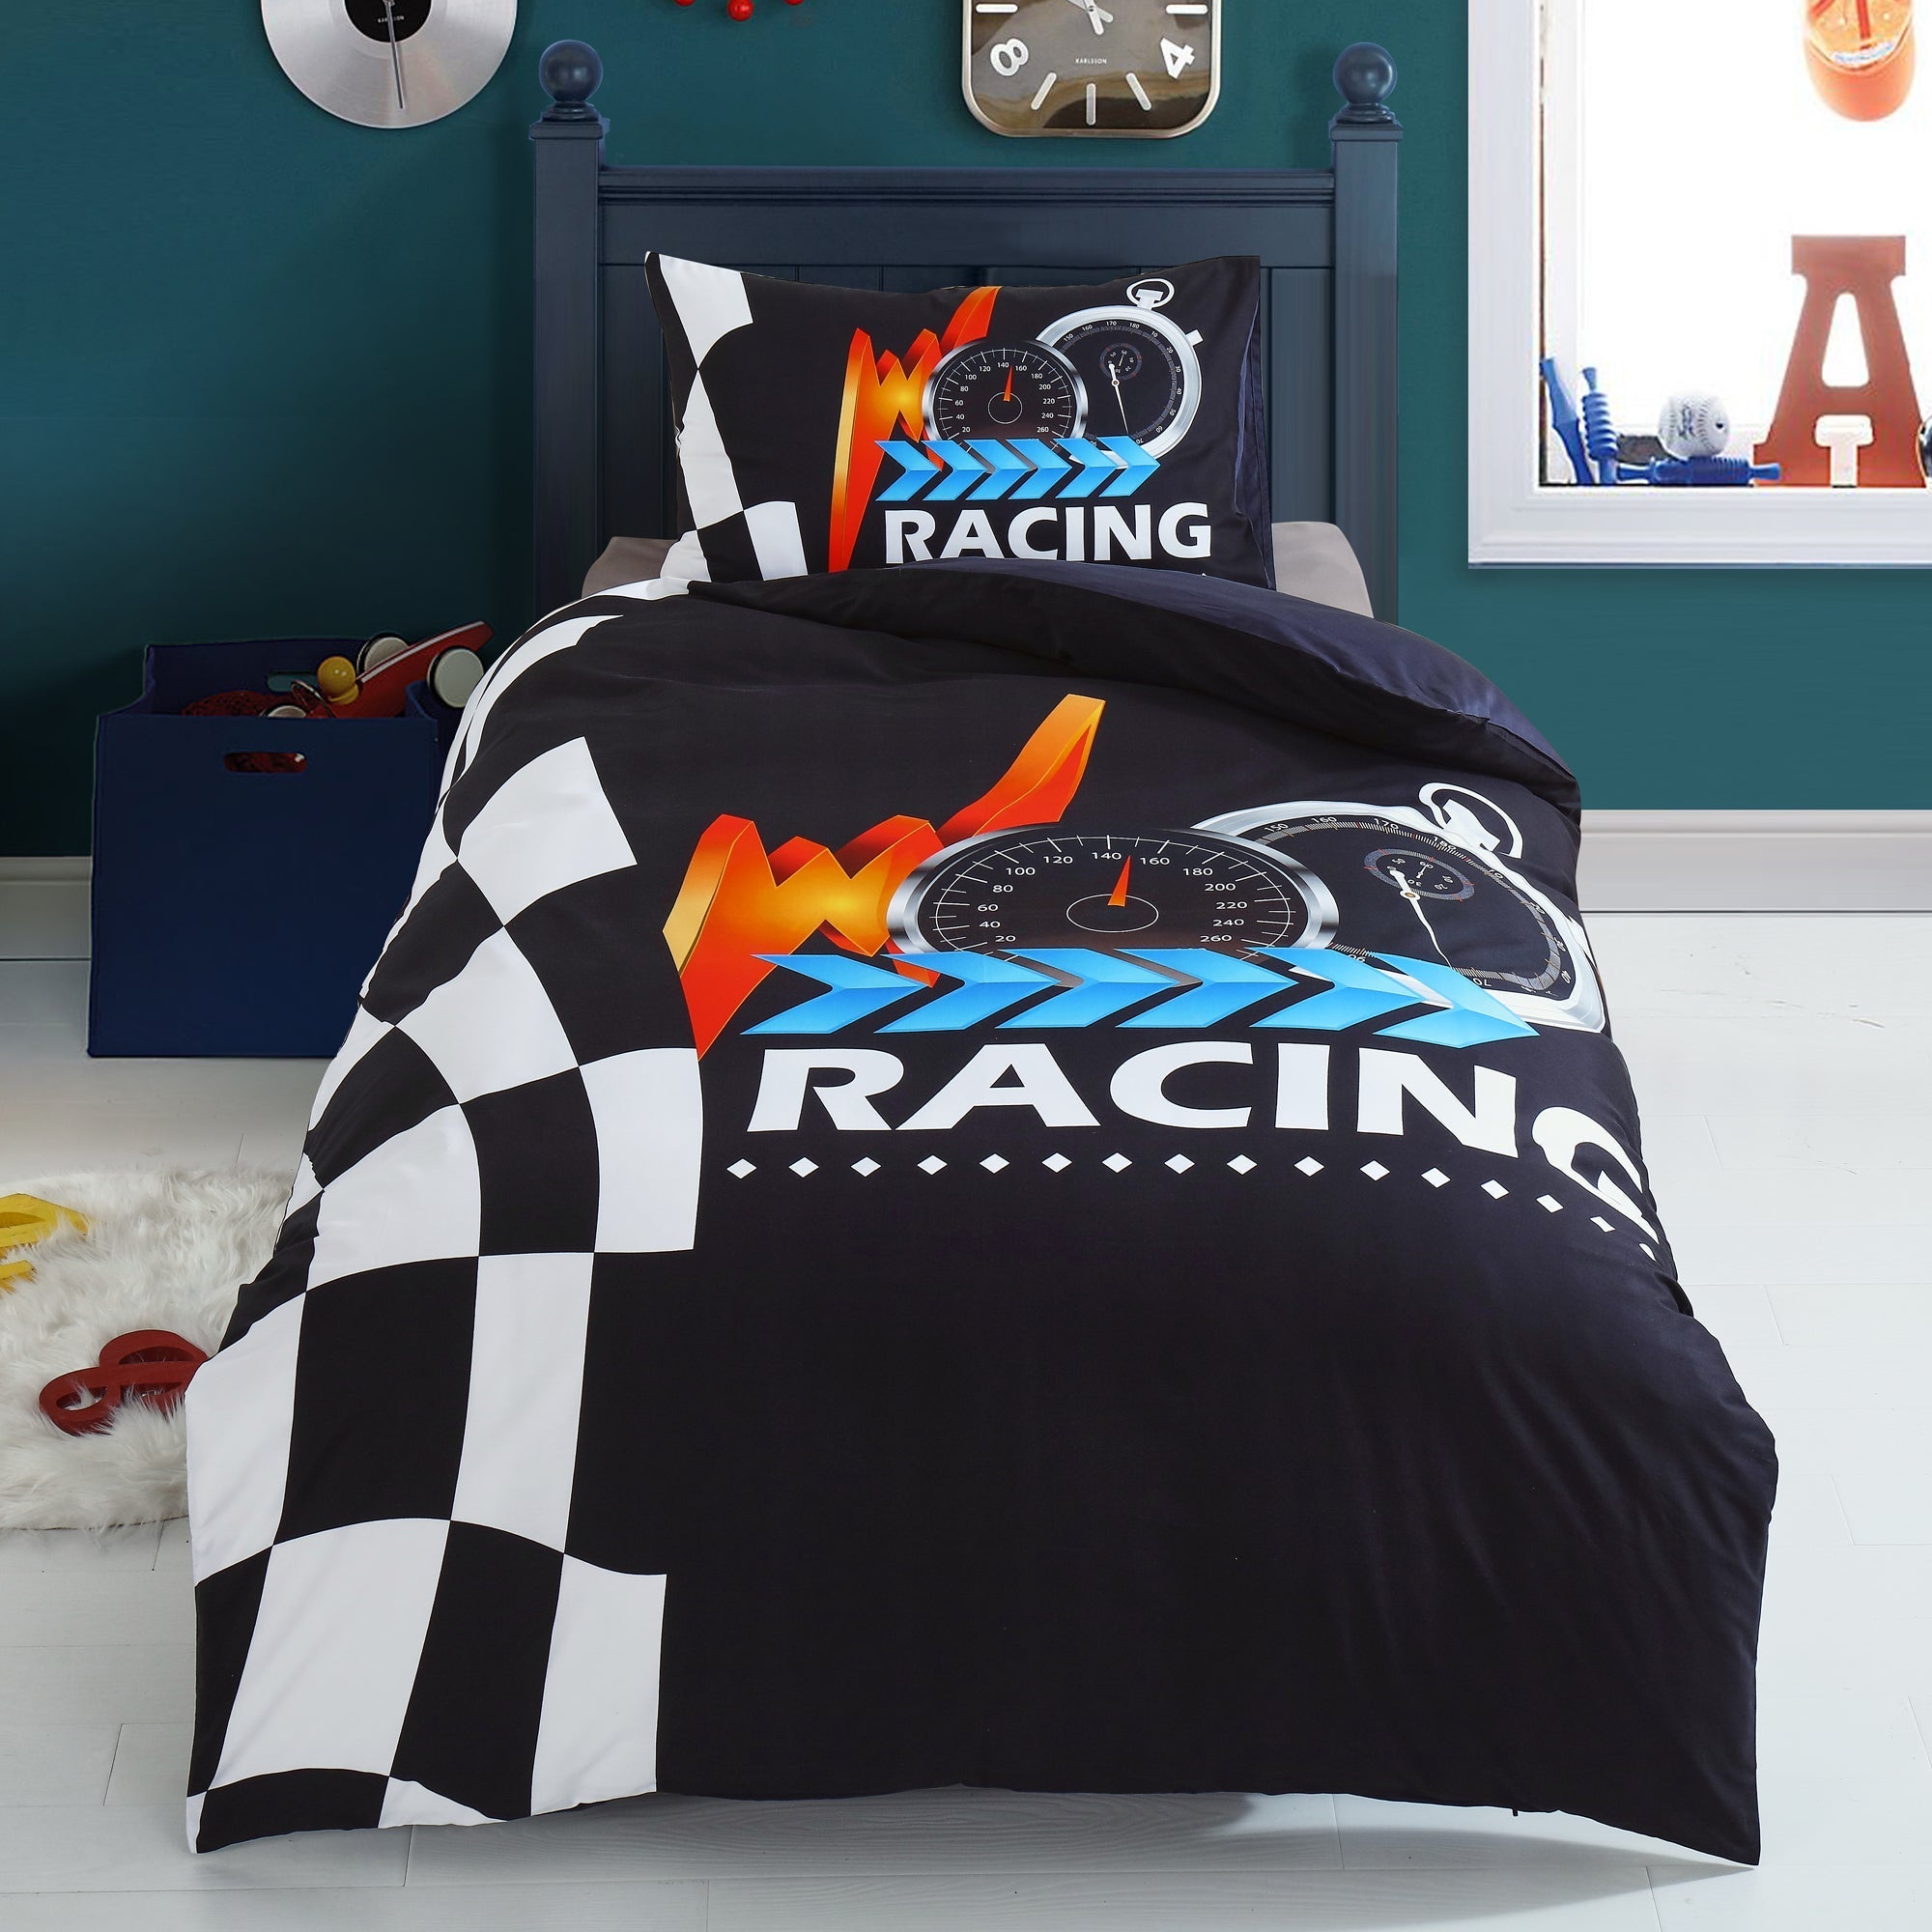 Single Size Kids Cotton Bedding Quilt Cover with Pillow Case - Racing Clock